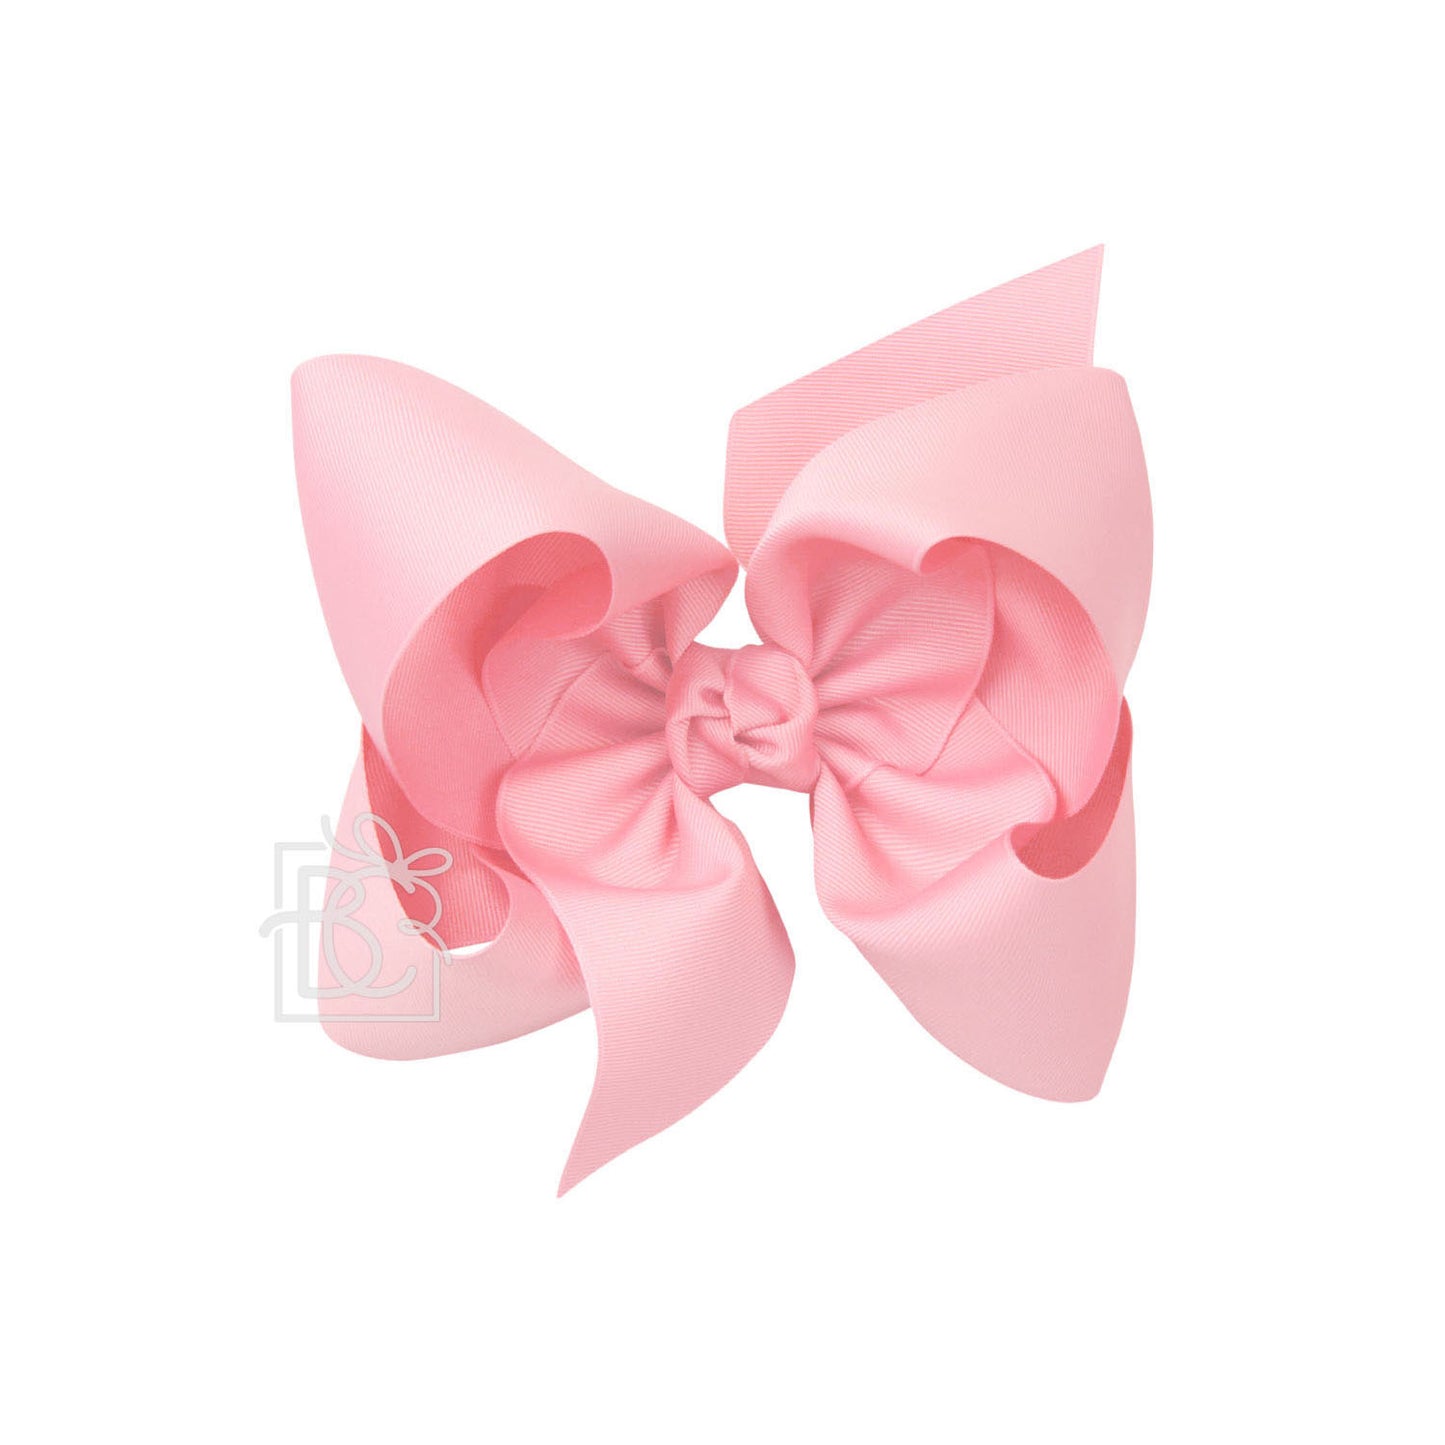 Texas Sized Bow in Pink  - Doodlebug's Children's Boutique